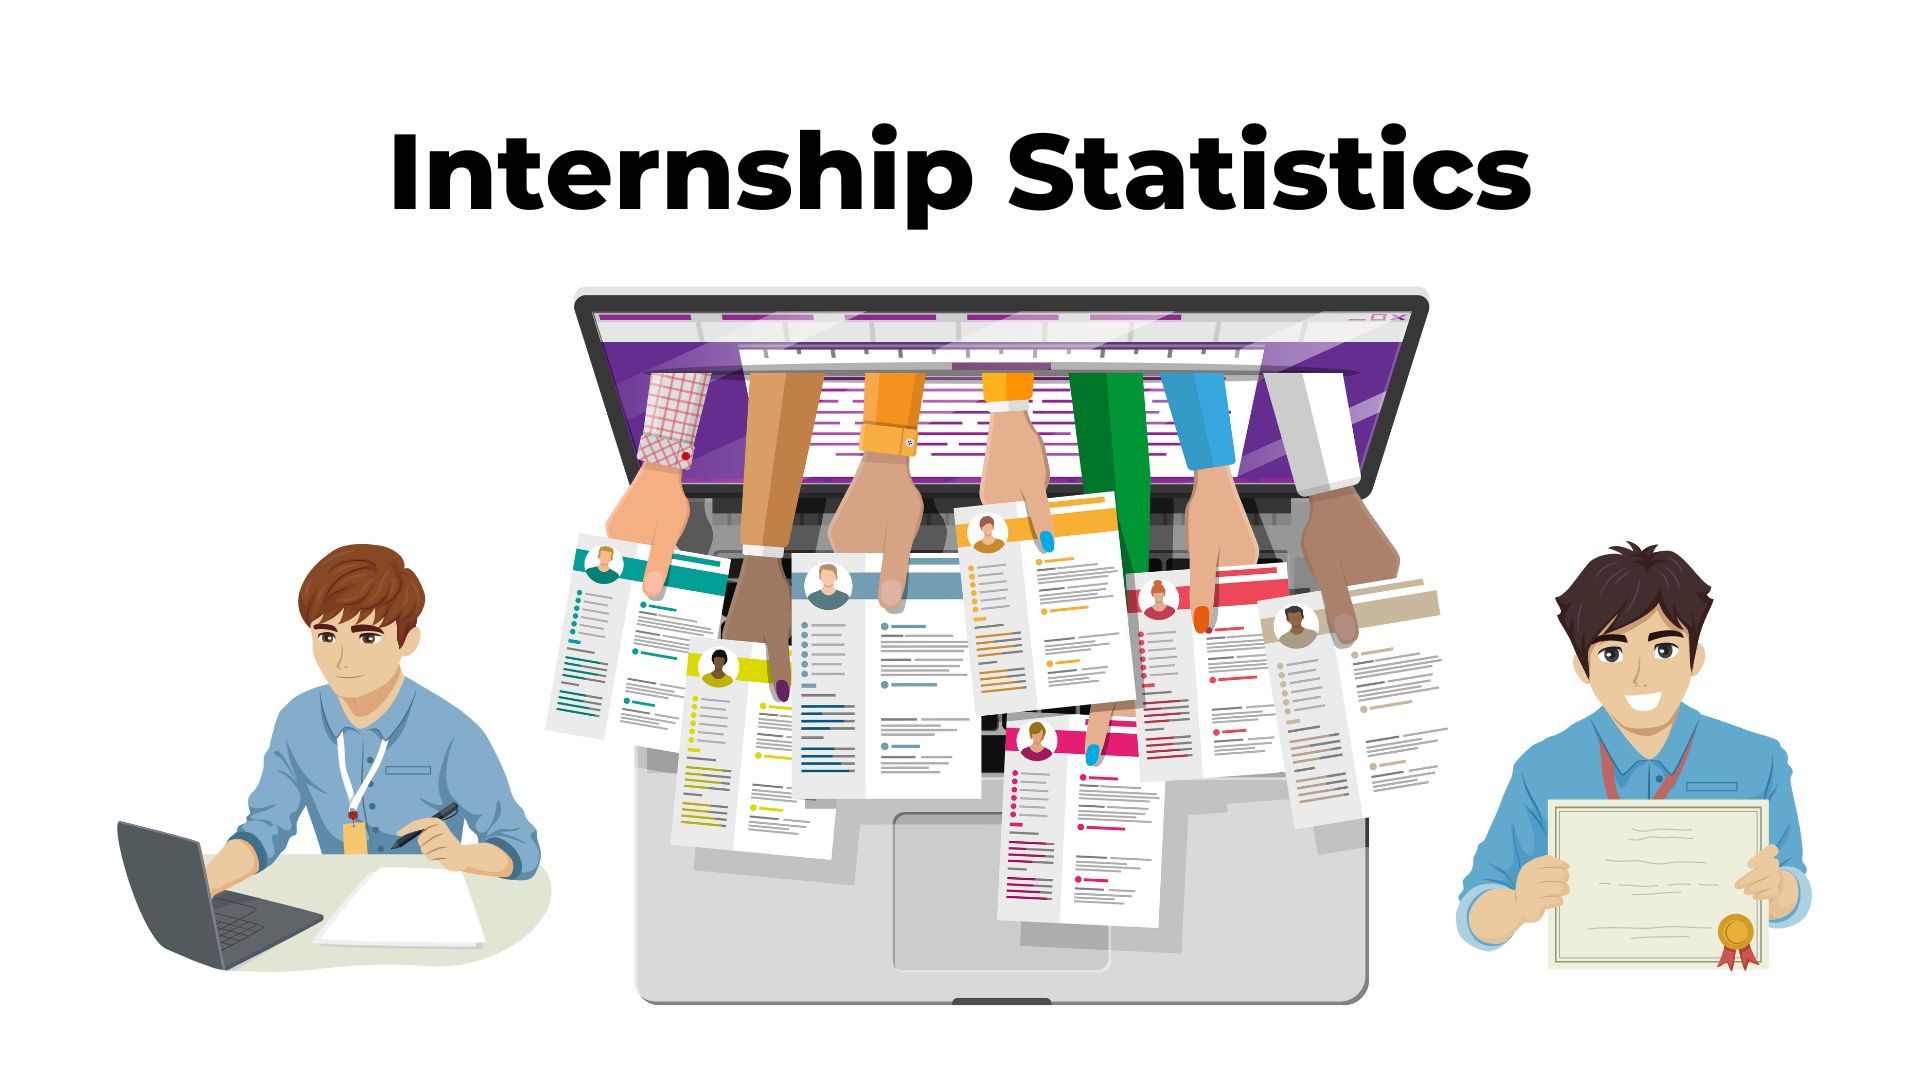 Key Internship Statistics 2022 – Covid Impact, Opportunities, Retention, Benefits and Income